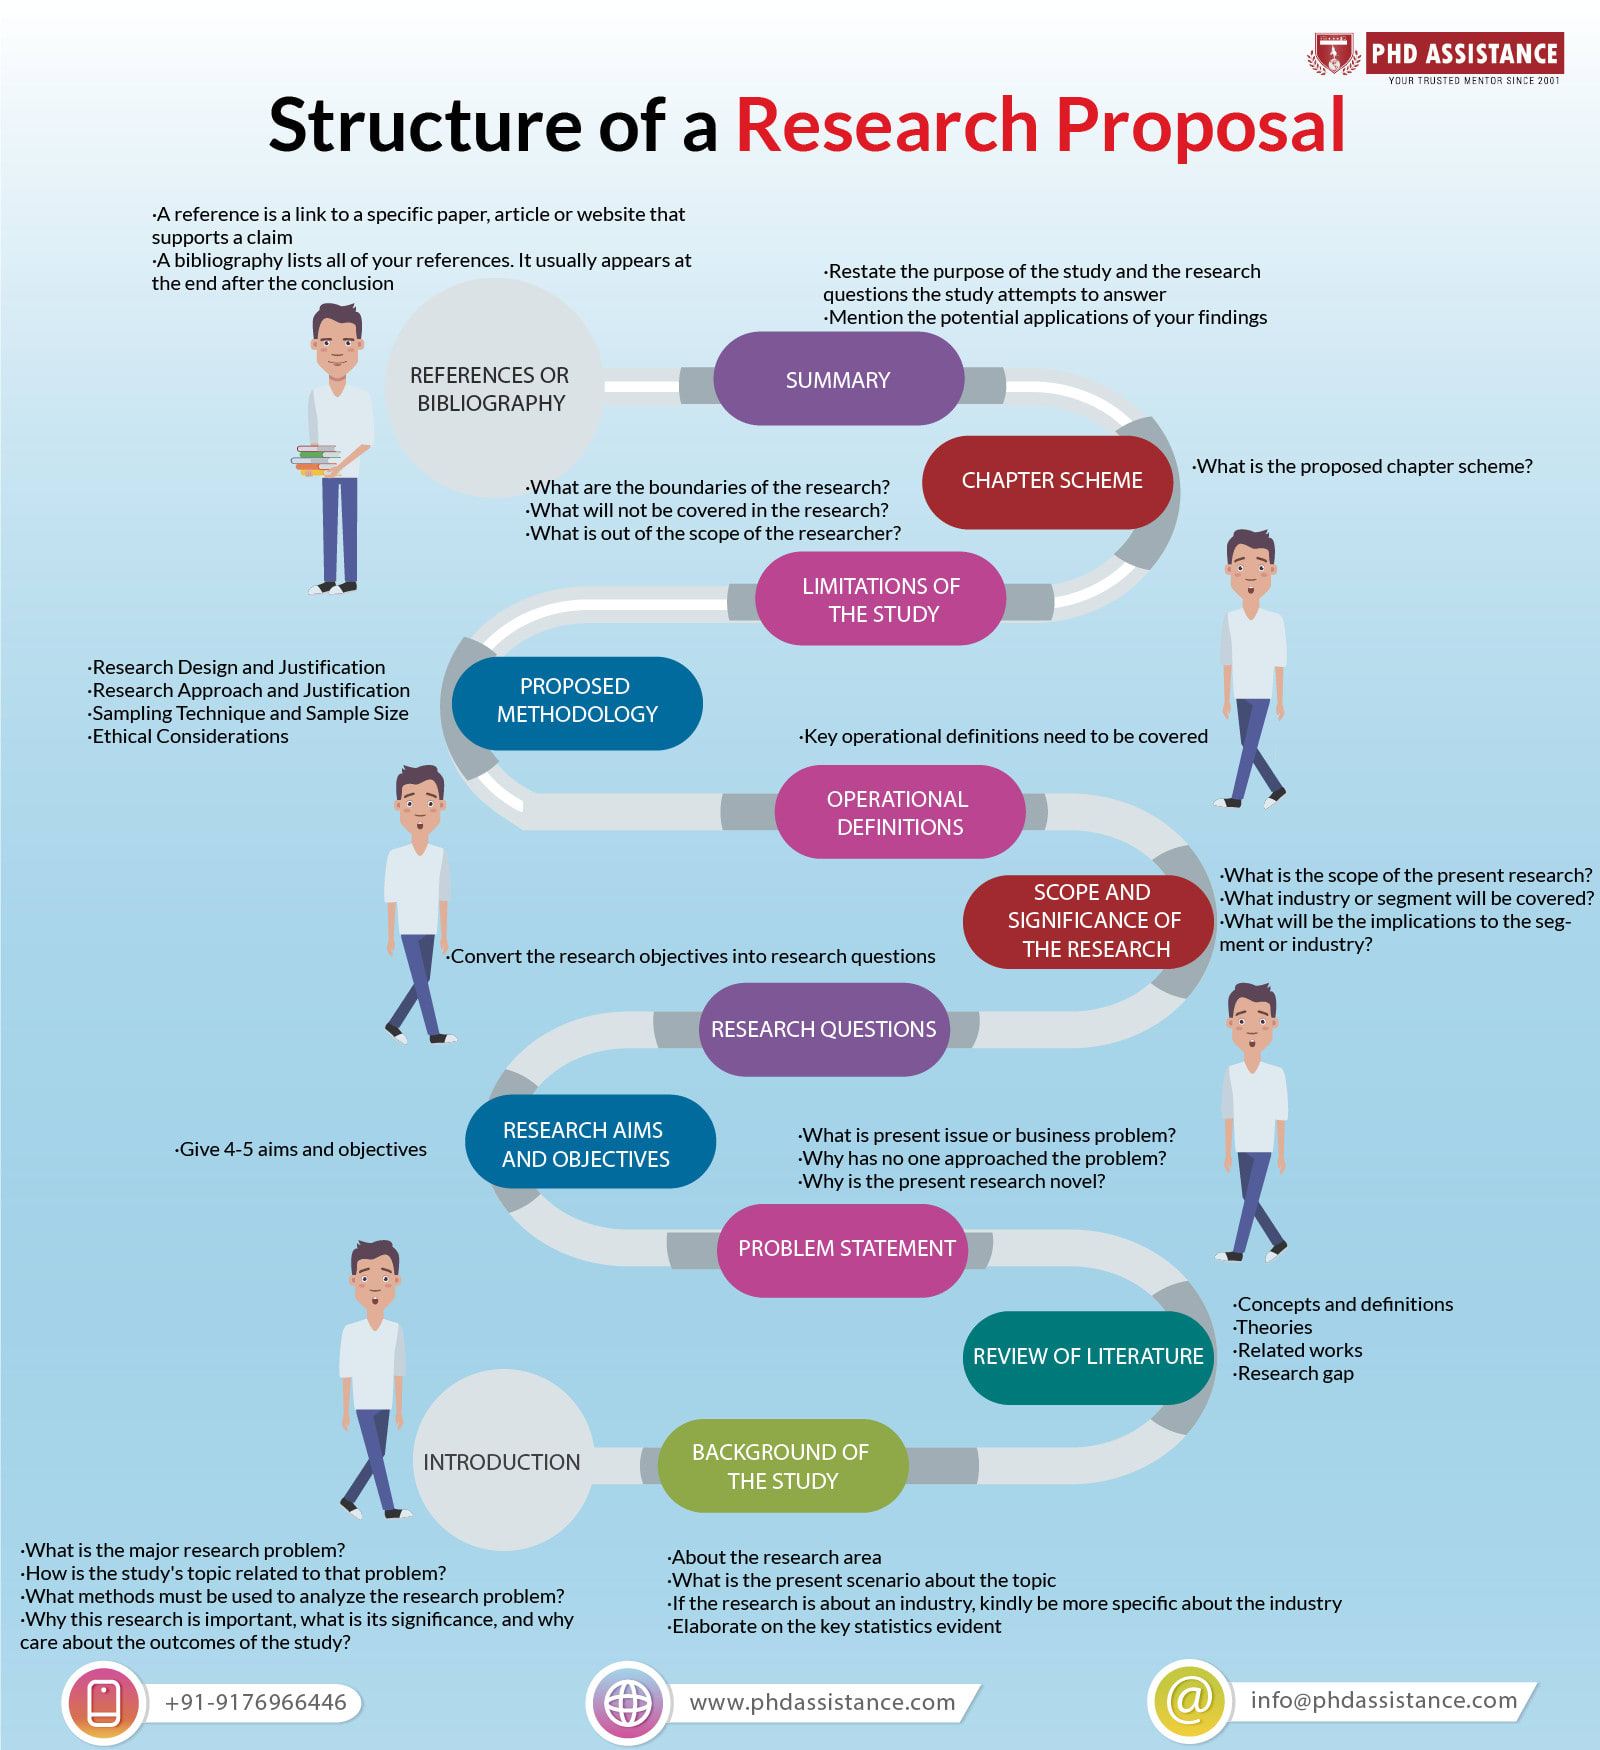 Do your article writing, research, proposal and summaries, by